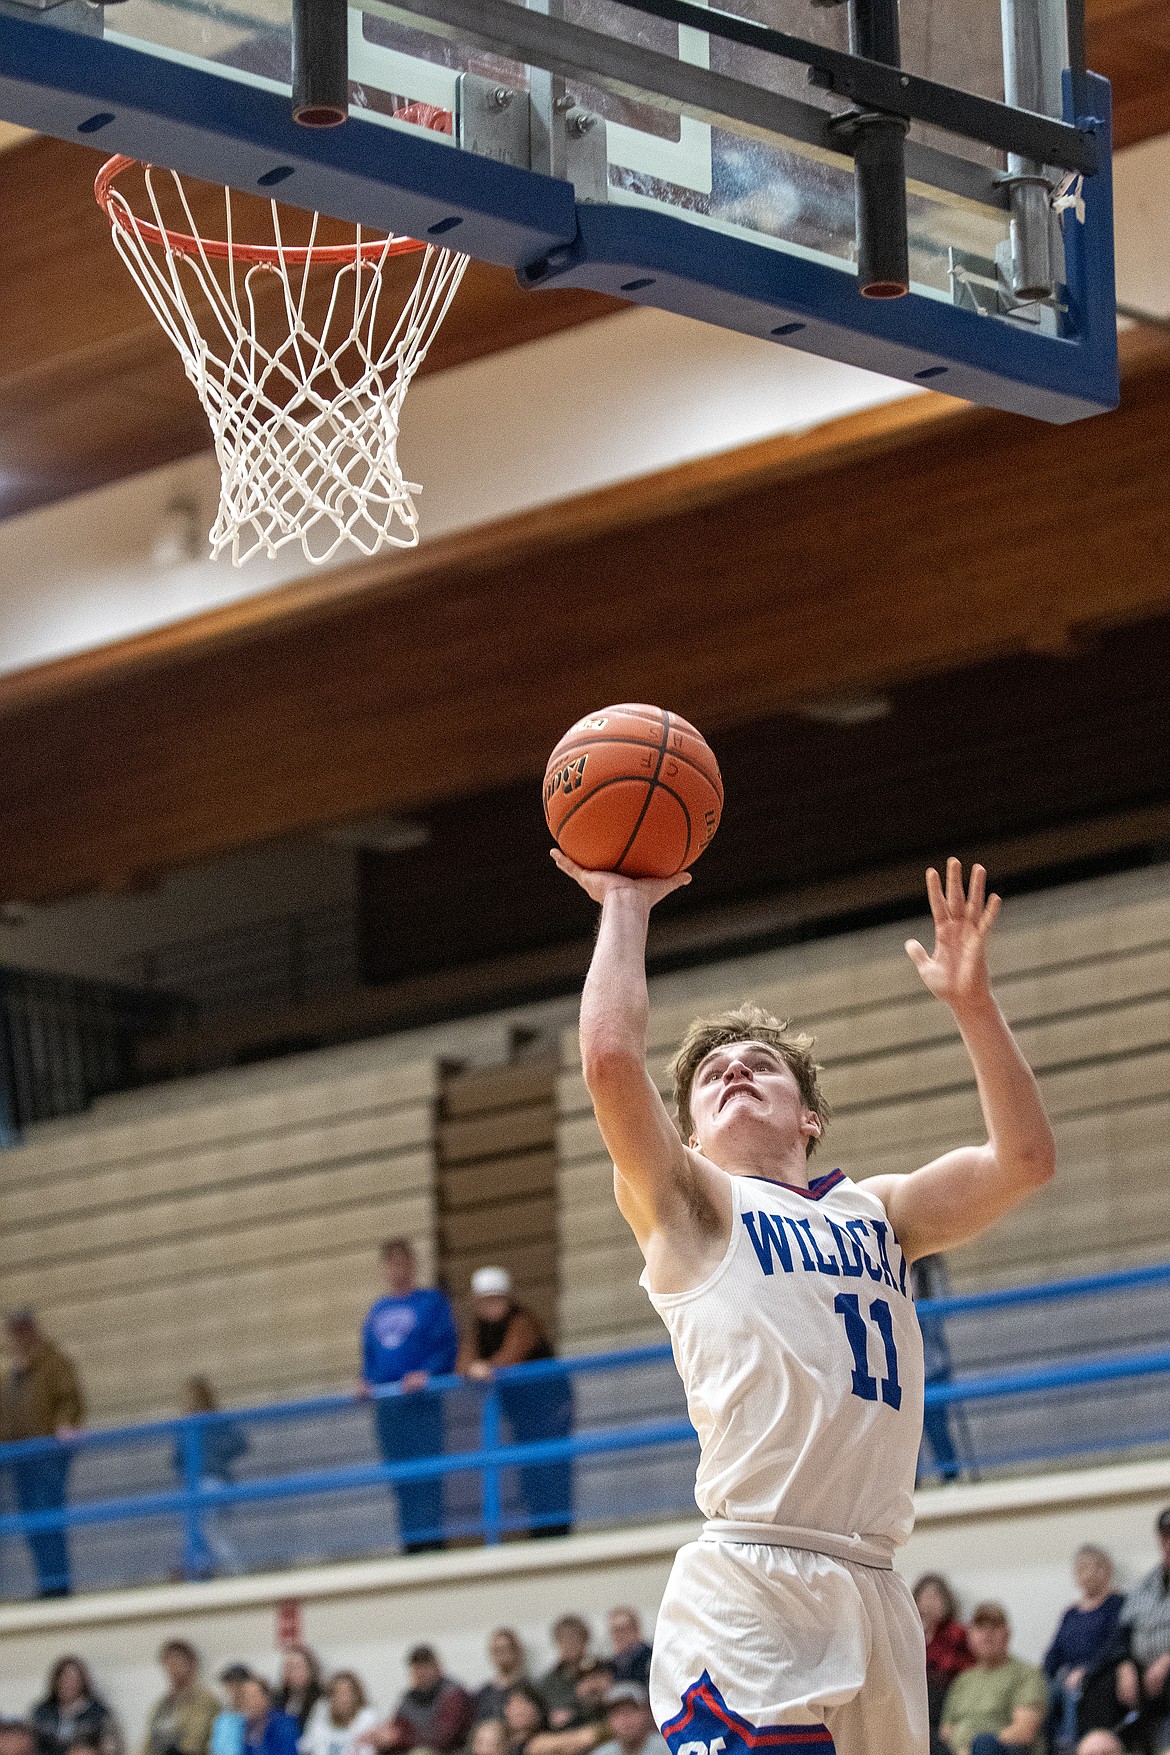 WIldcat Mark Robison puts up a shot against Frenchtown at home on Tuesday, Dec. 19. (Avery Howe photo)